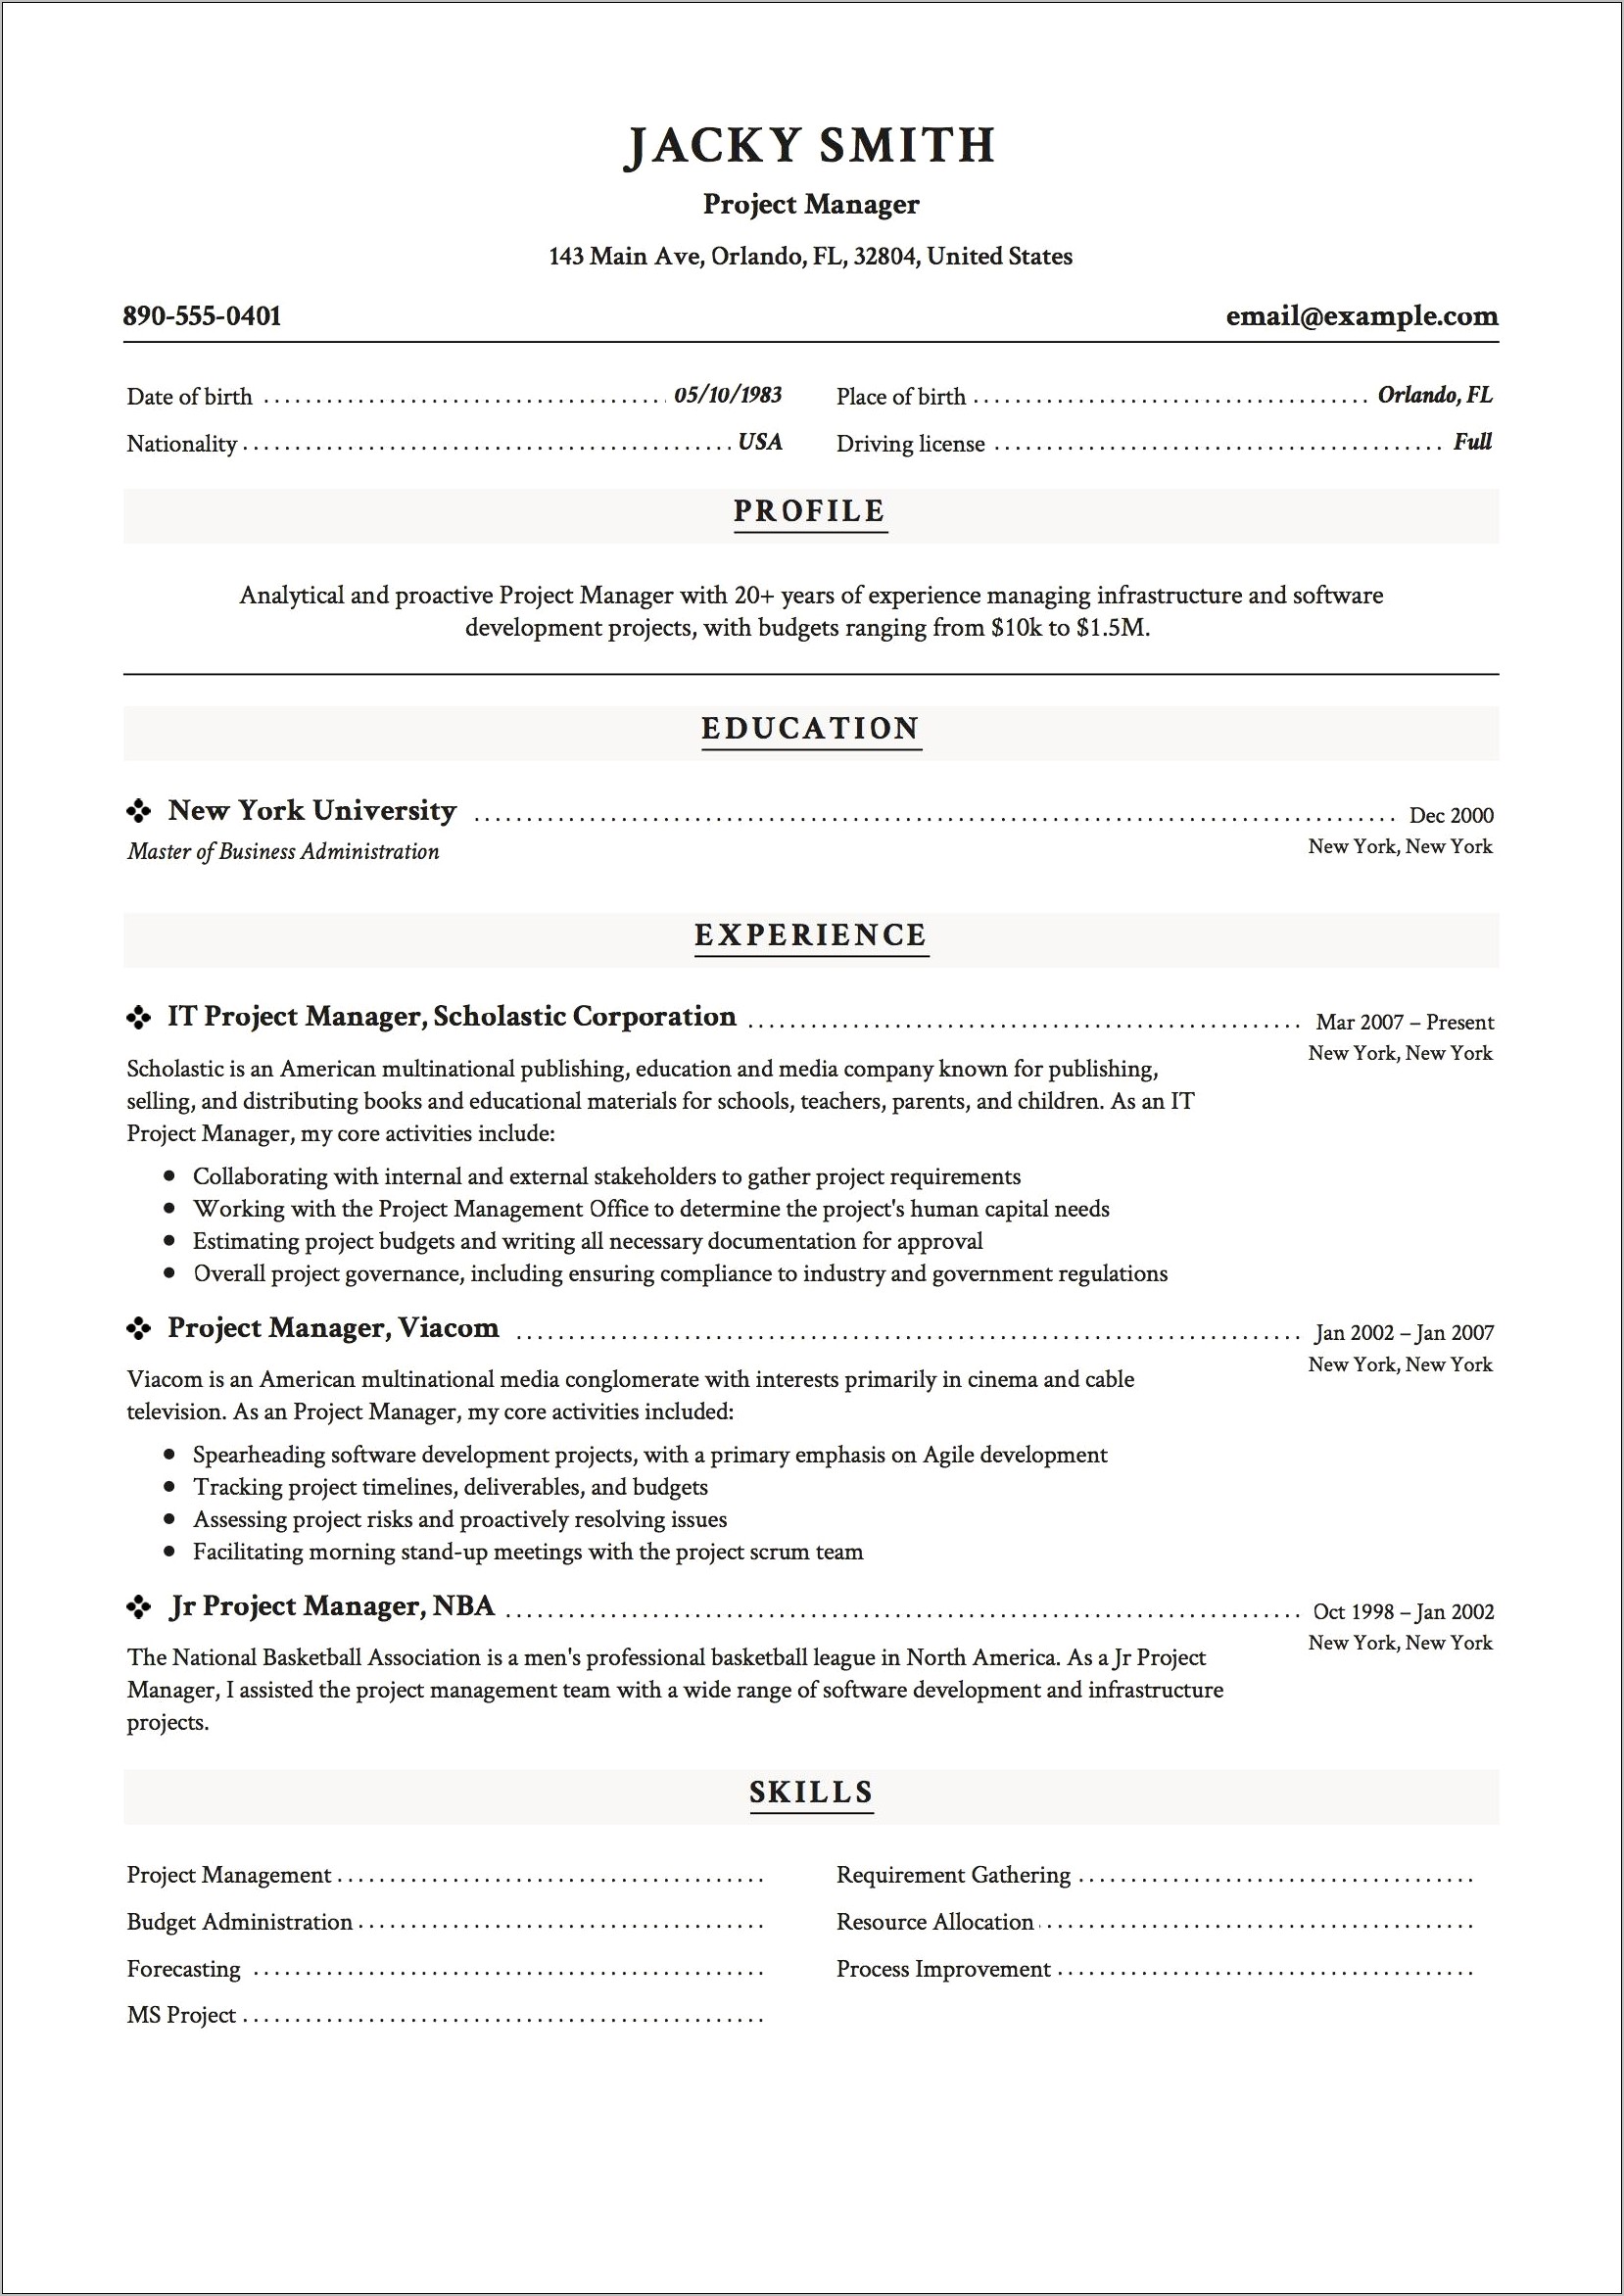 Project Manager Work Experience Resume